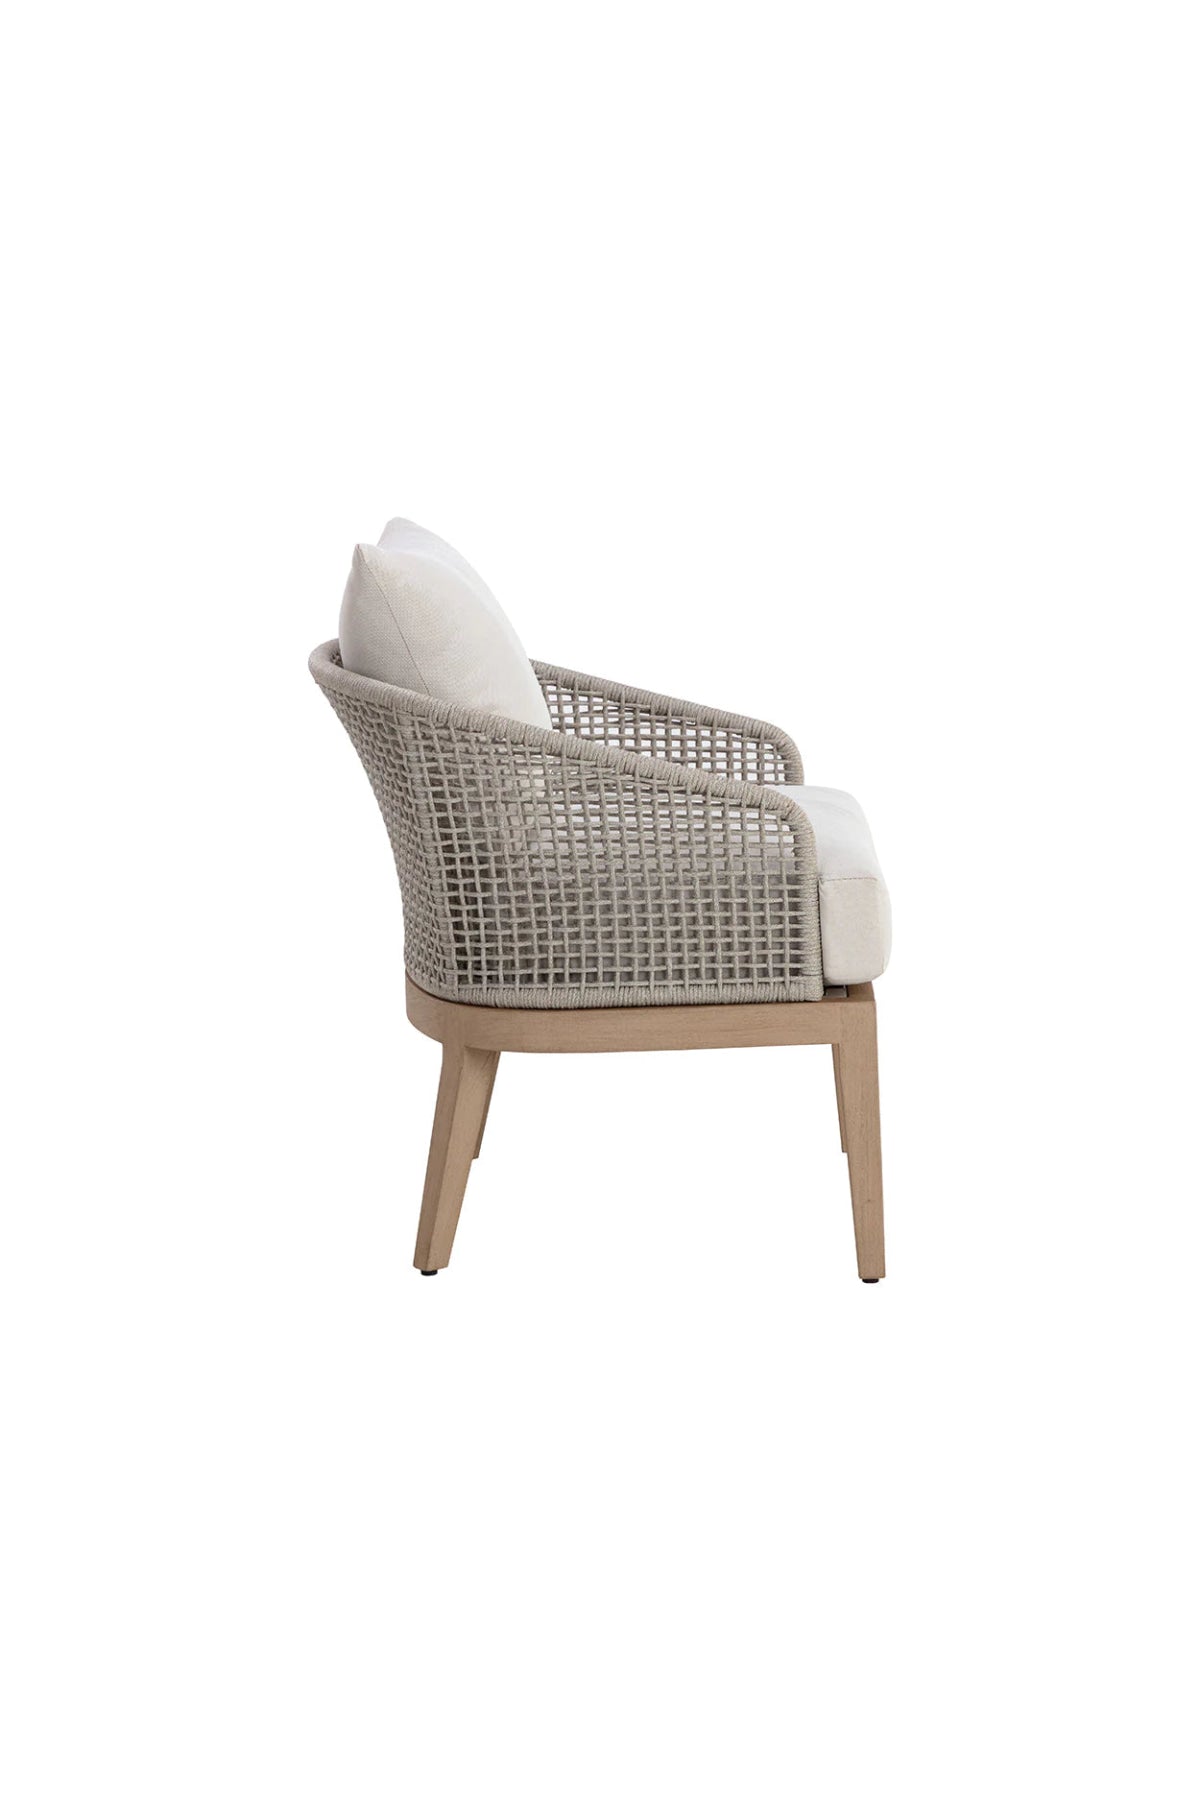 Rome Outdoor Lounge Chair